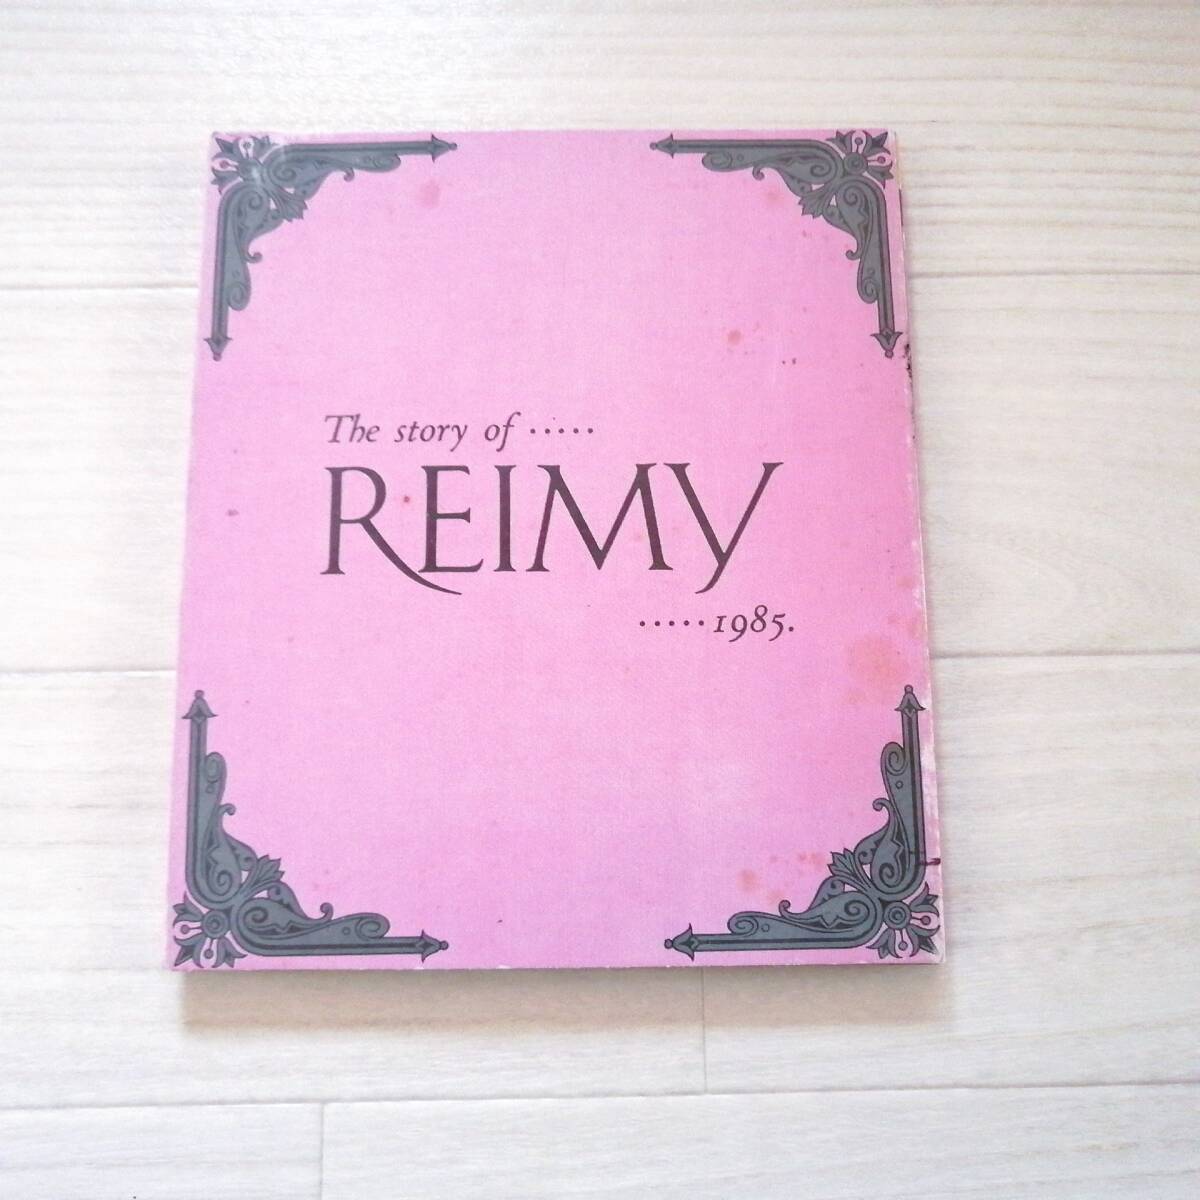  beauty beautiful pamphlet Ray mithe story of***REIMY***1985 goods 